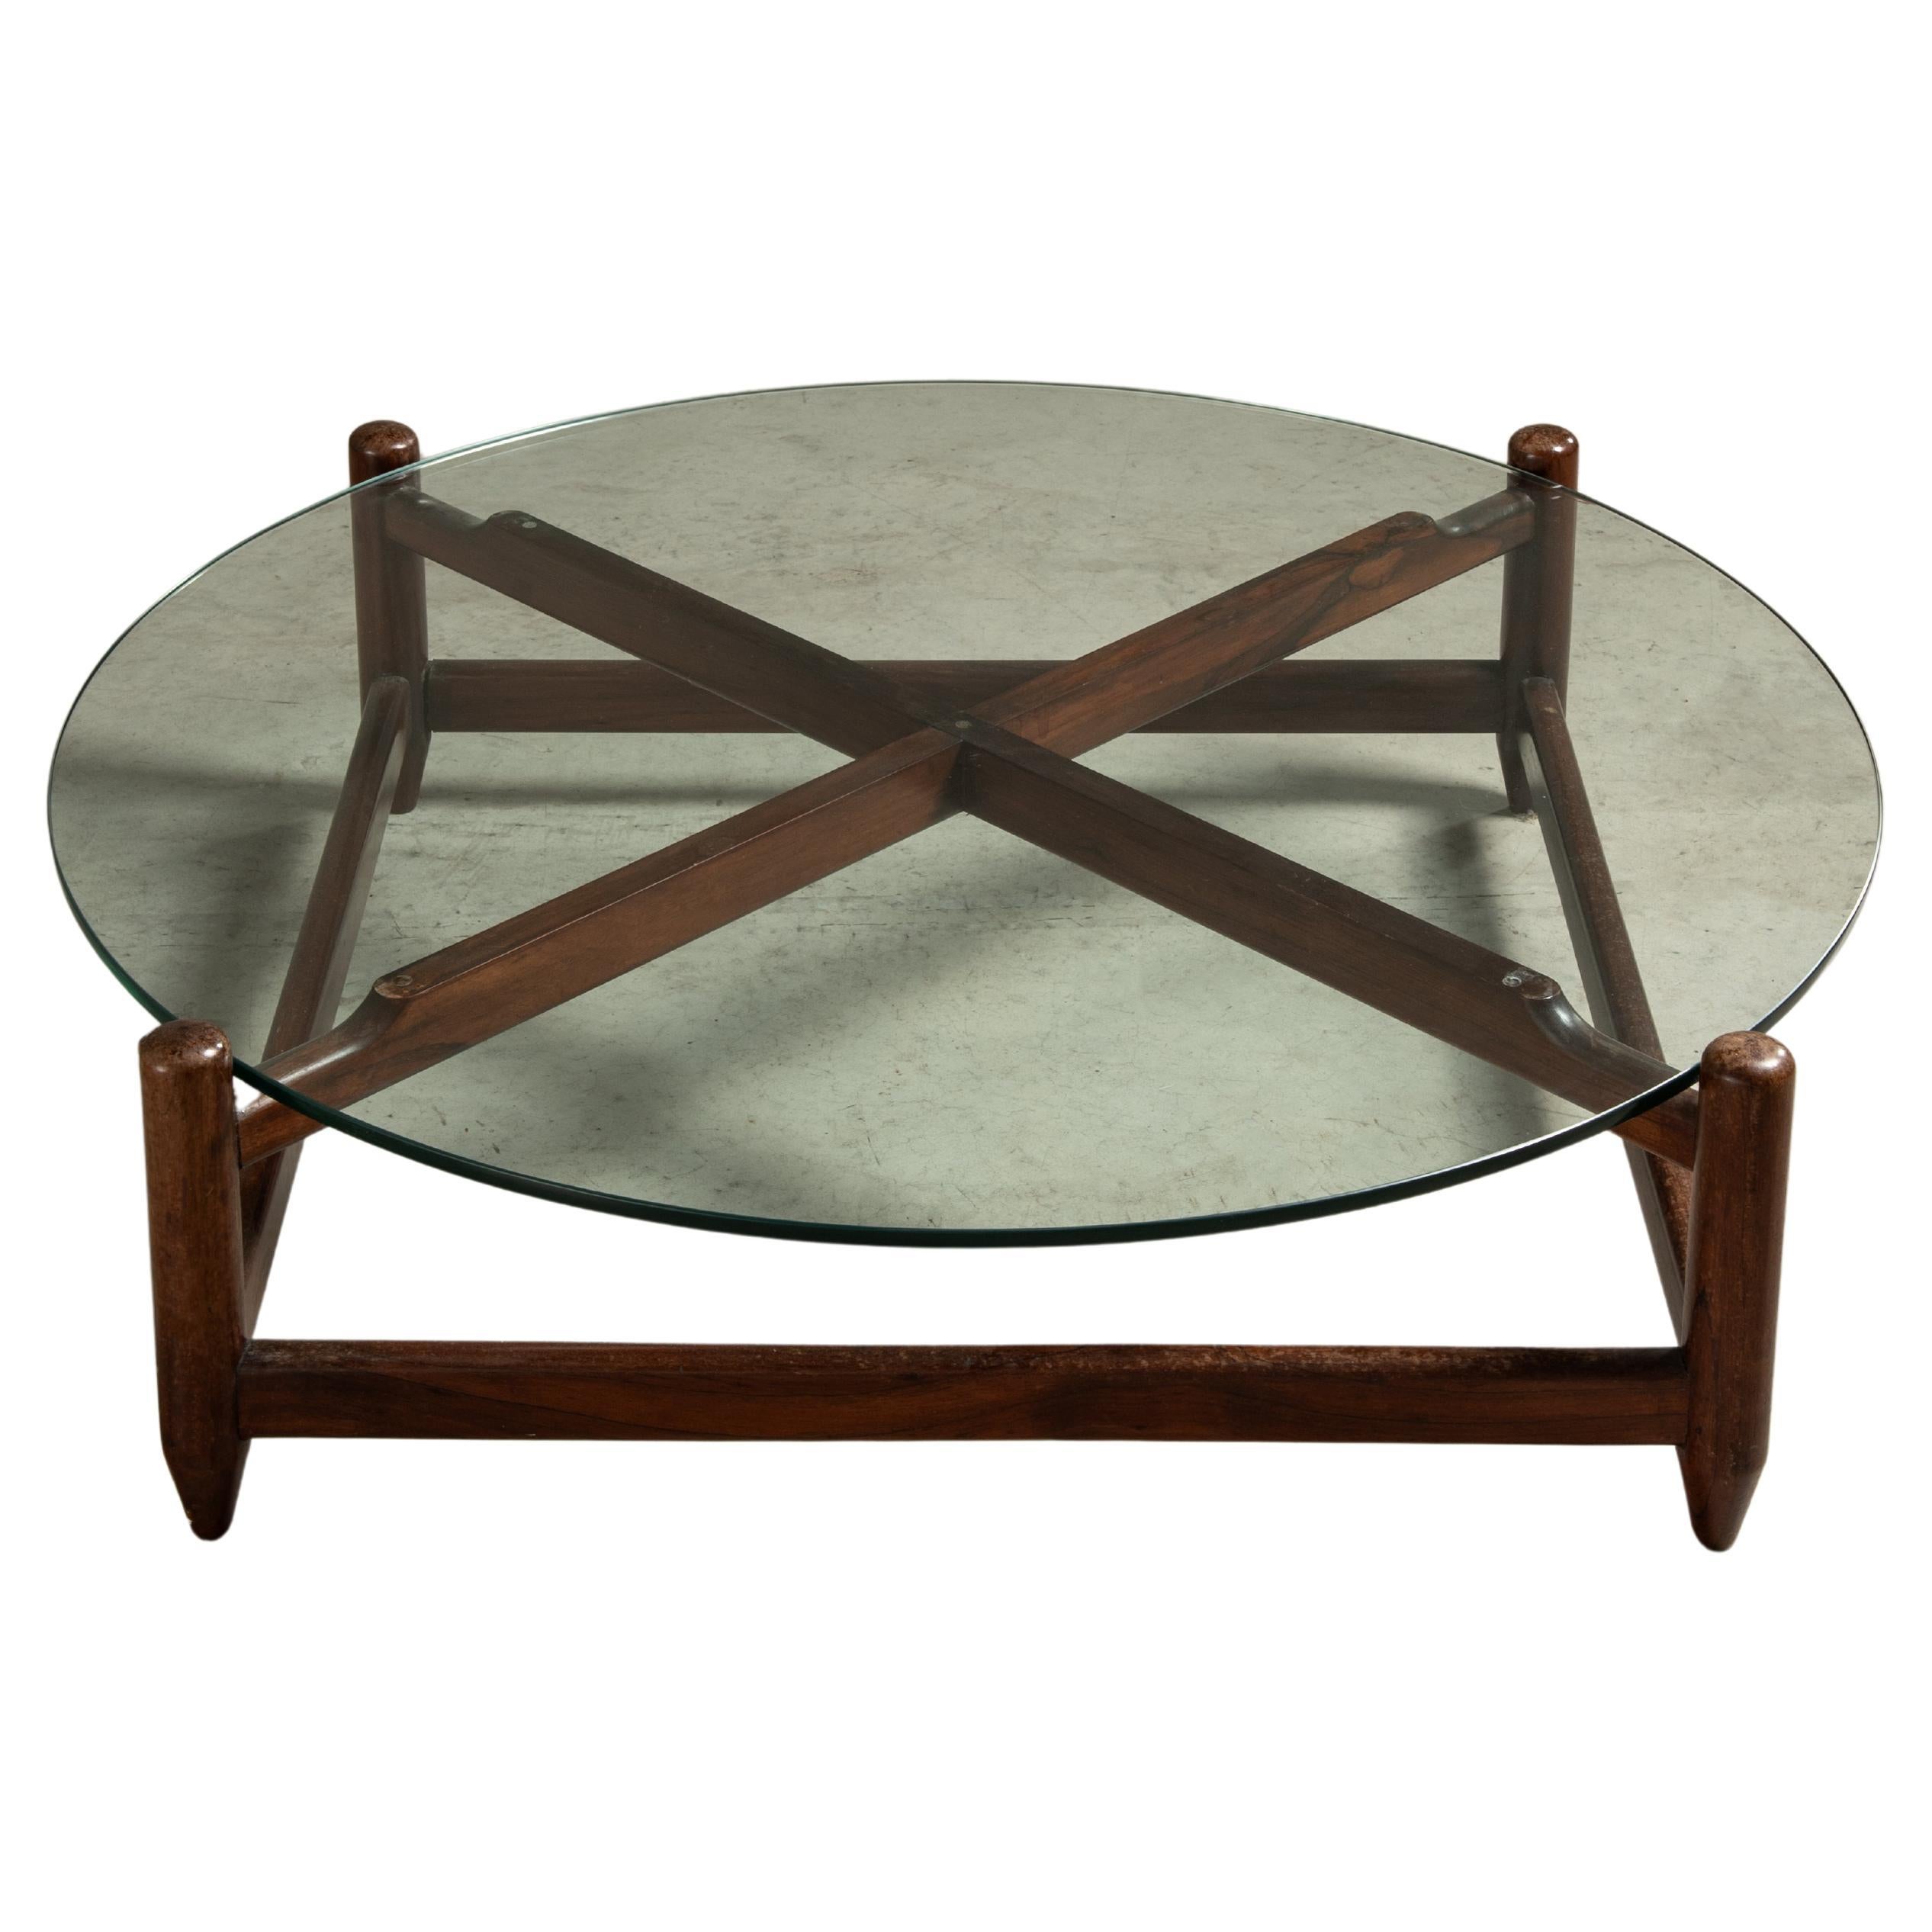 Rounded Coffee Table in Solid Hardwood and Glass, Brazilian Mid-Century Modern For Sale